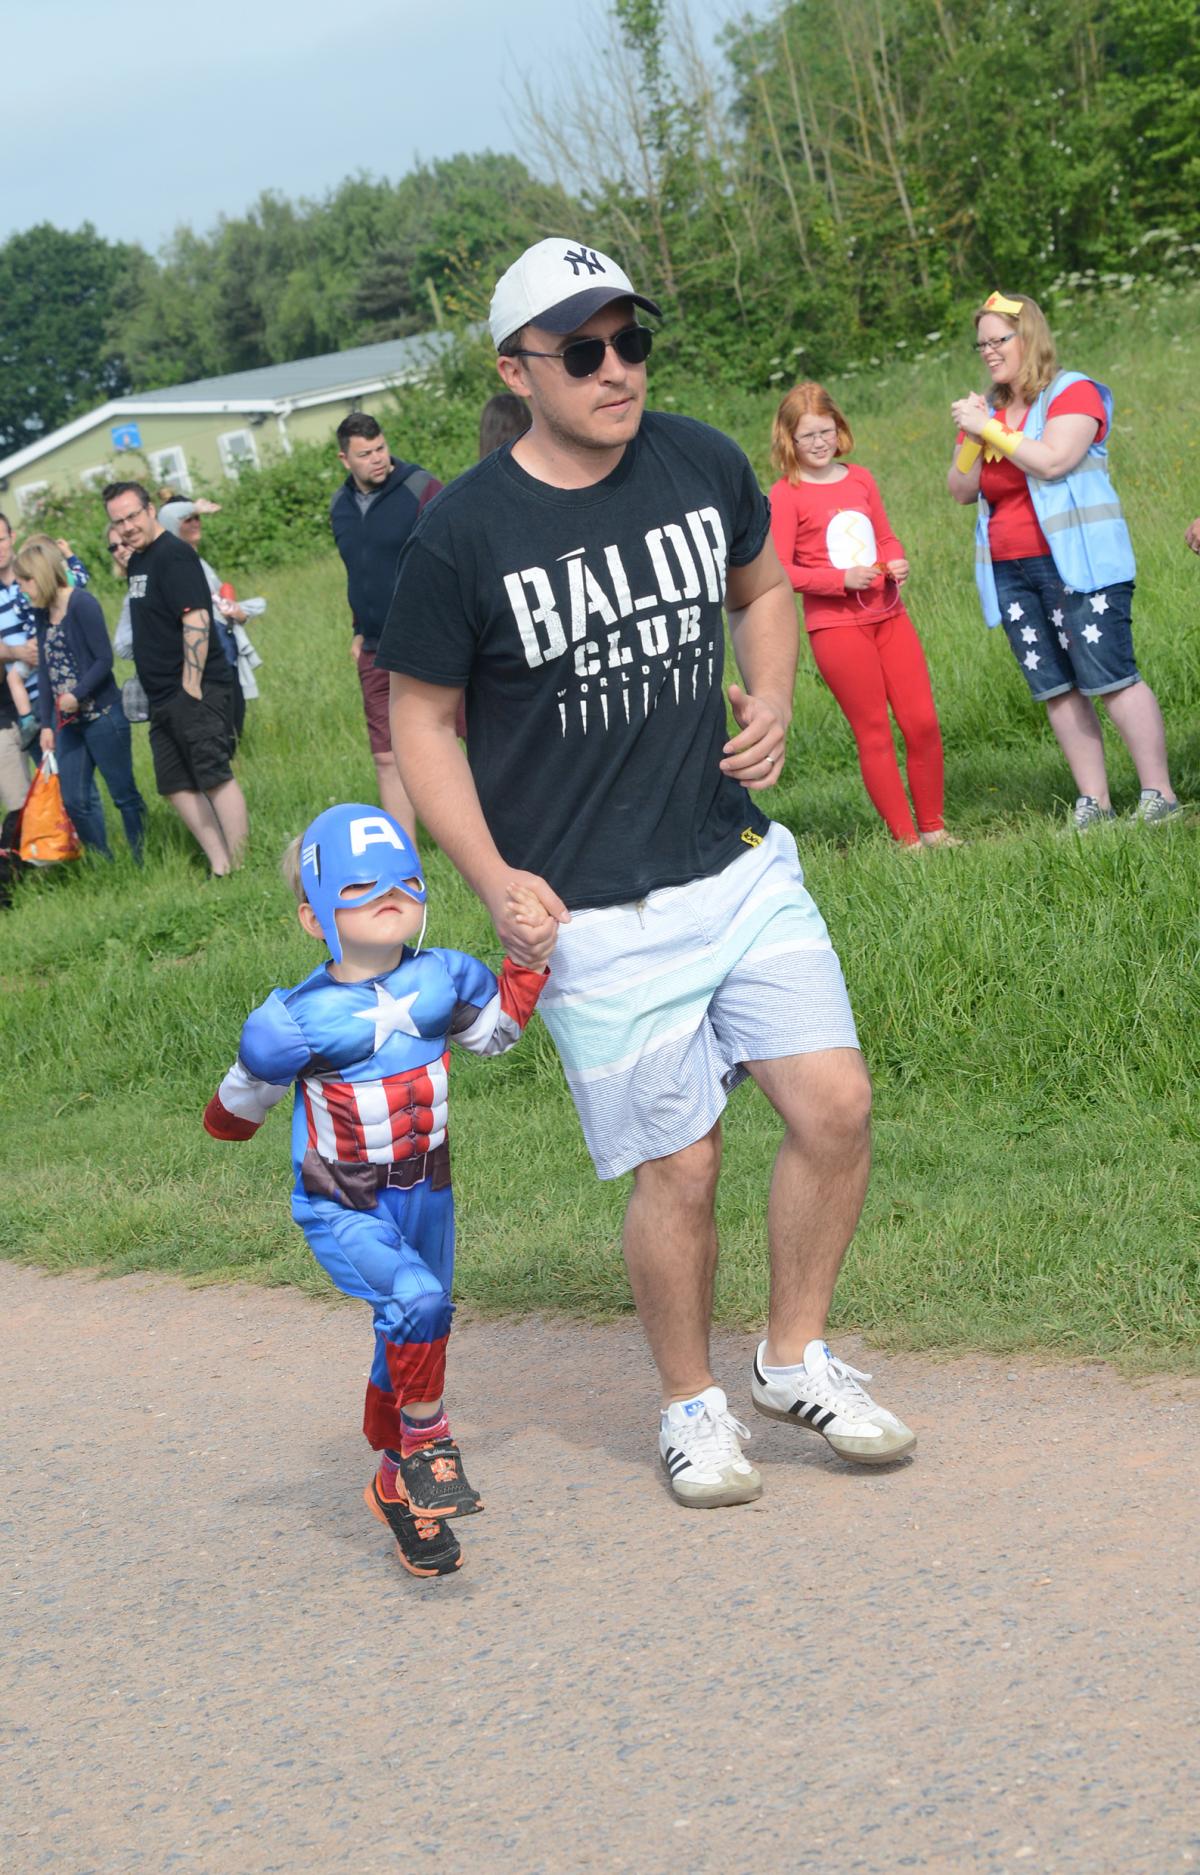 Many runners, families and volunteers got into costume for the day's superhero theme.